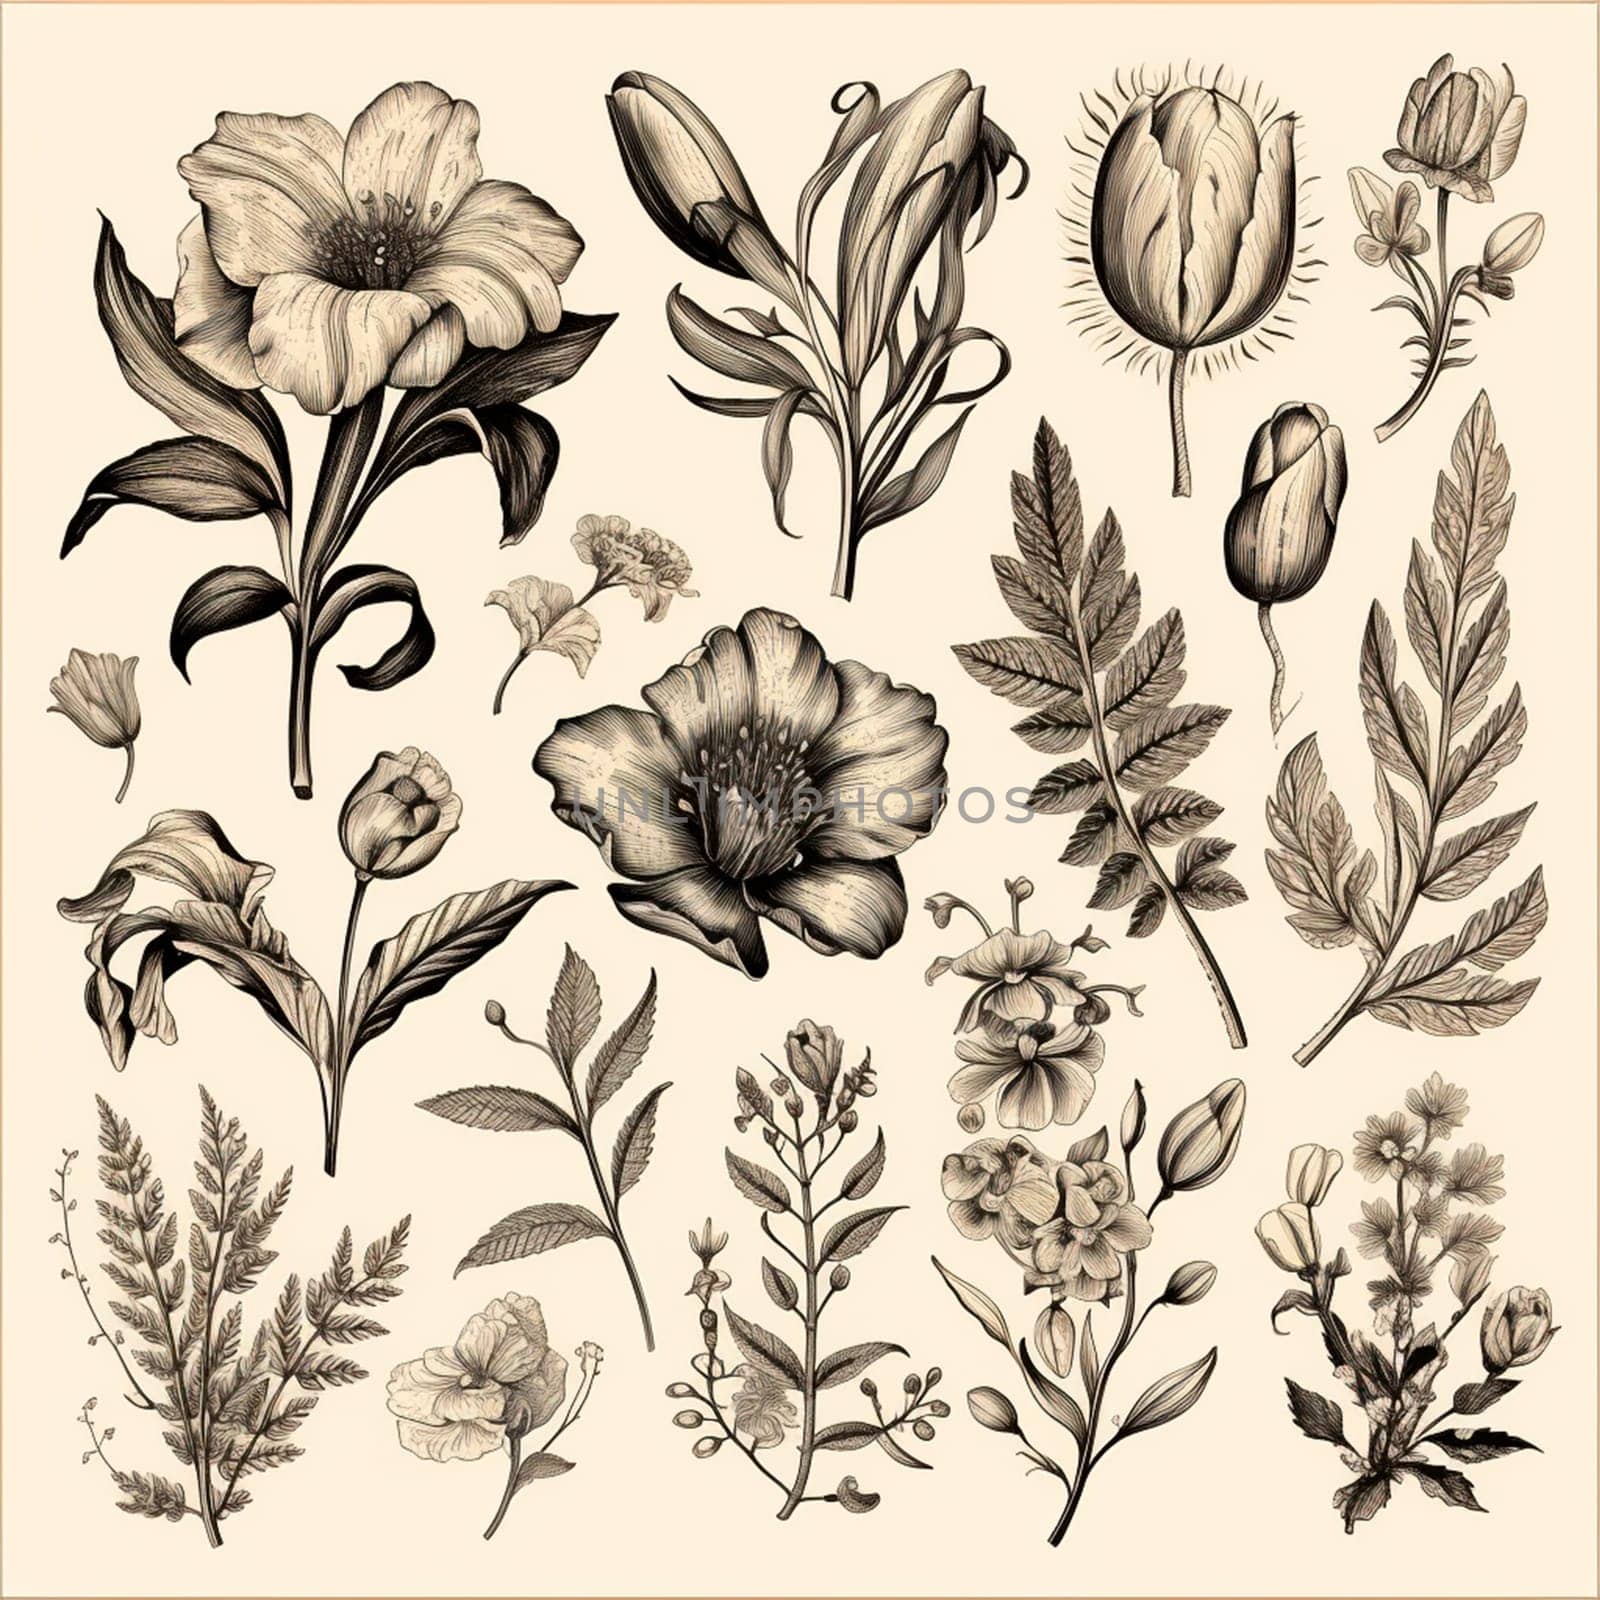 Black and white drawings of flowers and plants, hand drawings - image